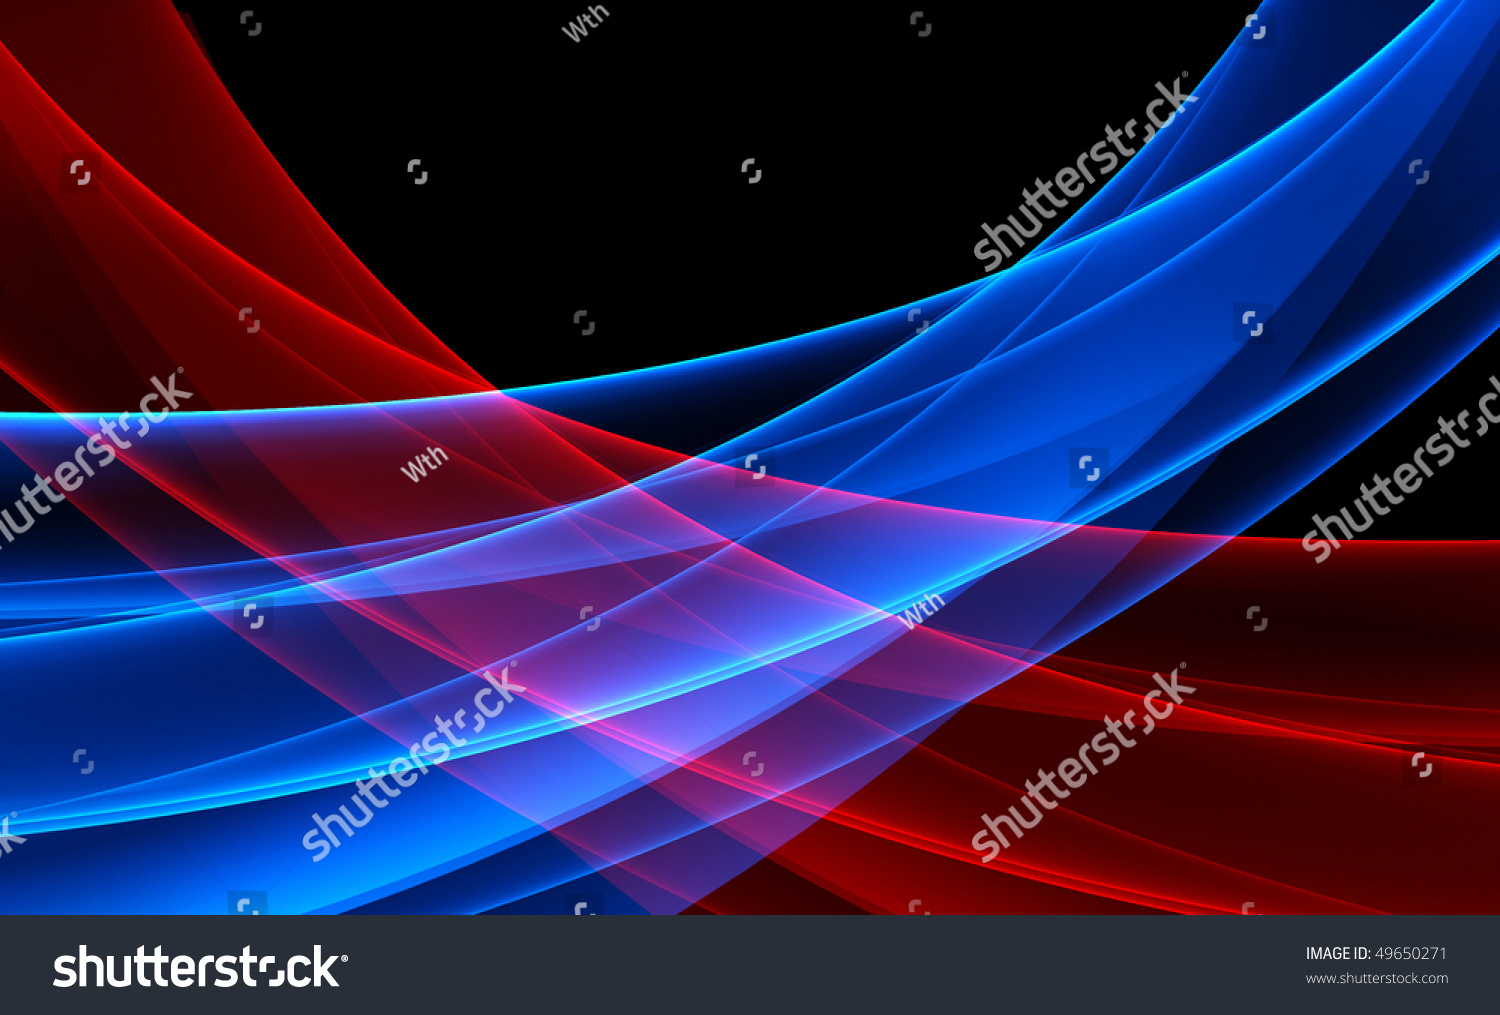 Red And Blue Waves Background - See More Variations In Portfolio Stock ...